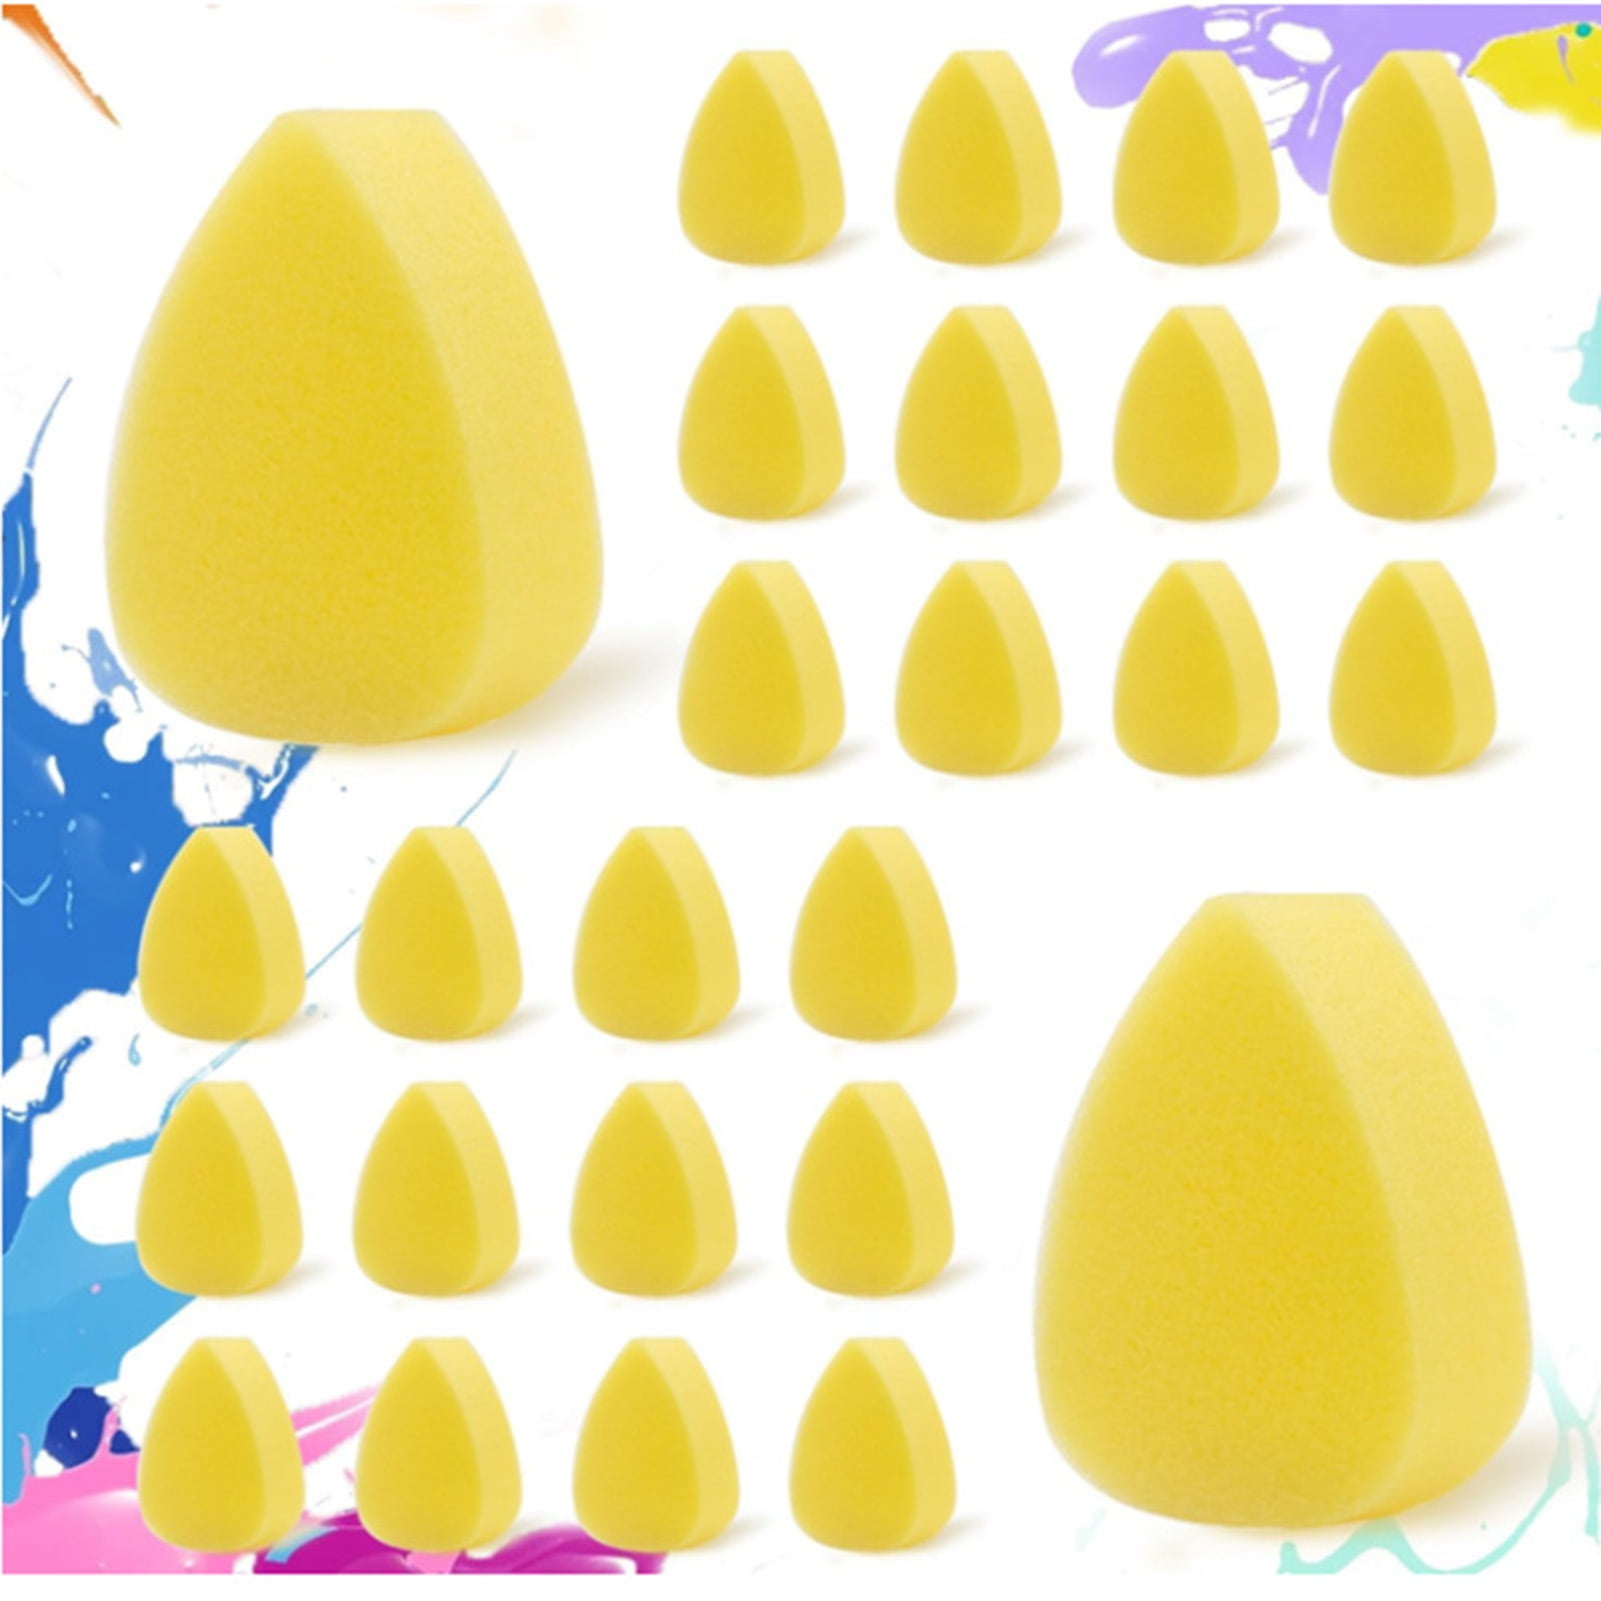 wirlsweal Elastic Absorbent Sponge Painting Sponge 24pcs Face Paint Sponges  High-density Easy to Use Semicircular Rich Shapes Soft Face Painting